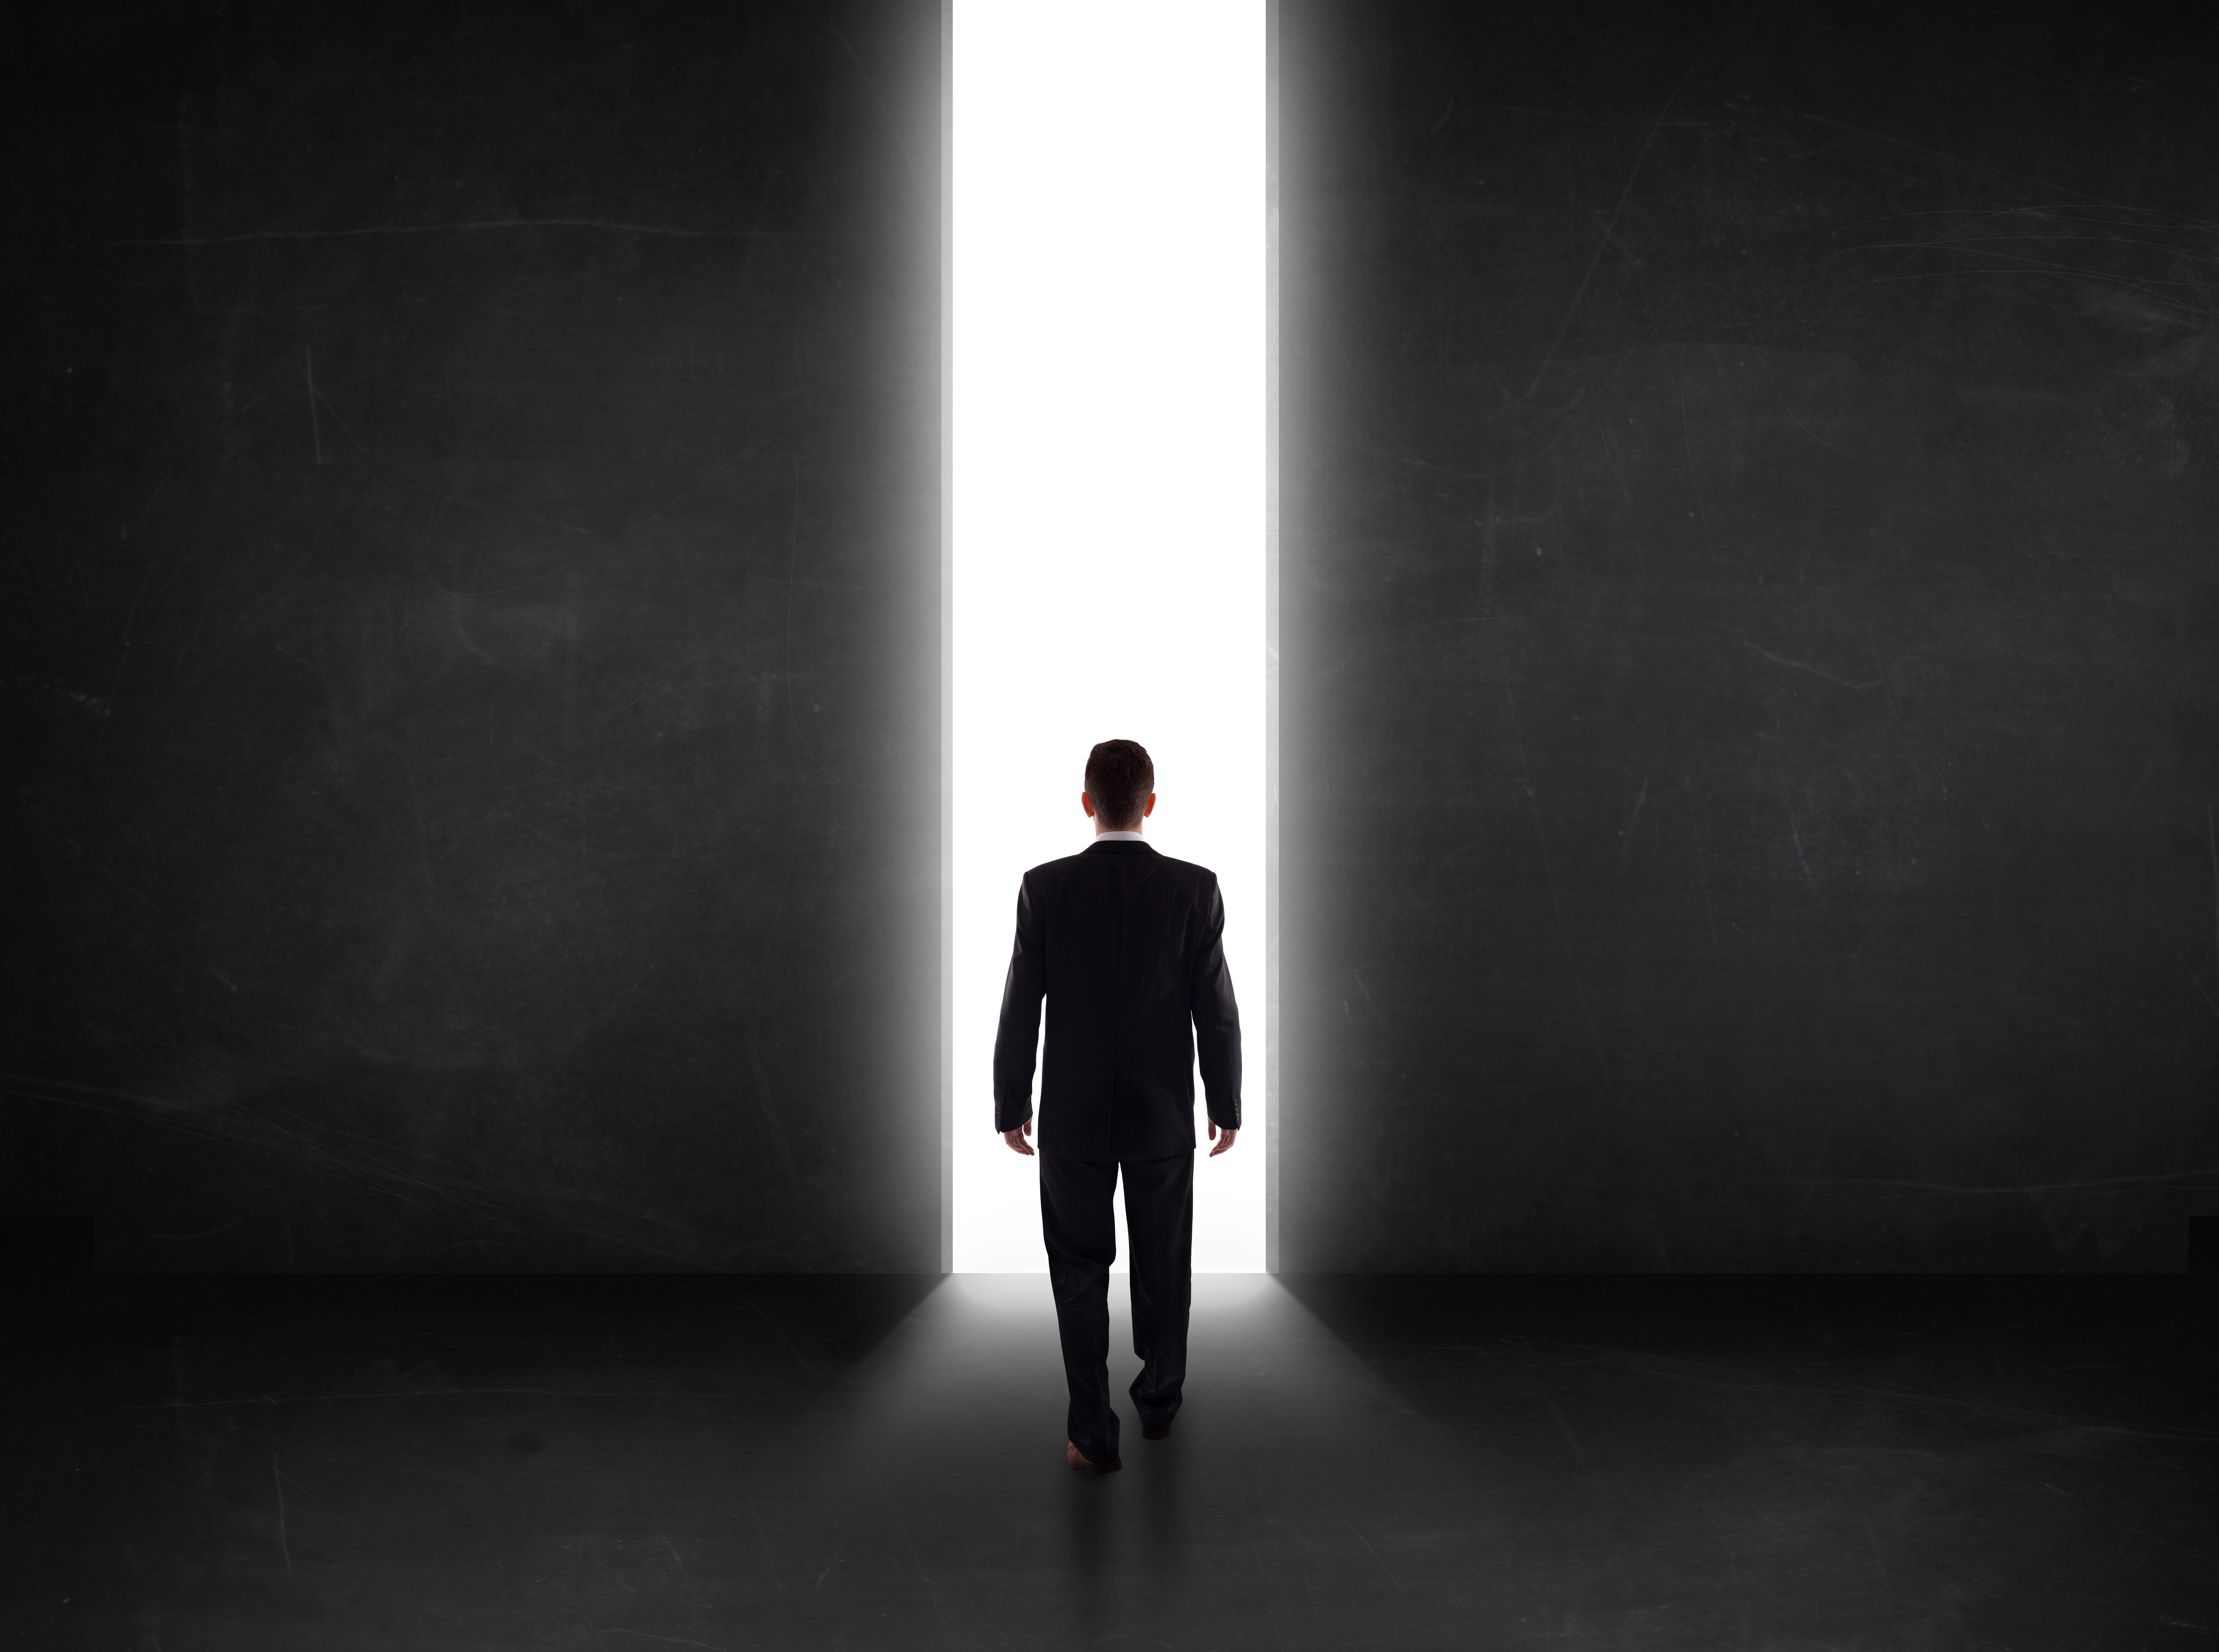 Business person looking at wall with light tunnel opening